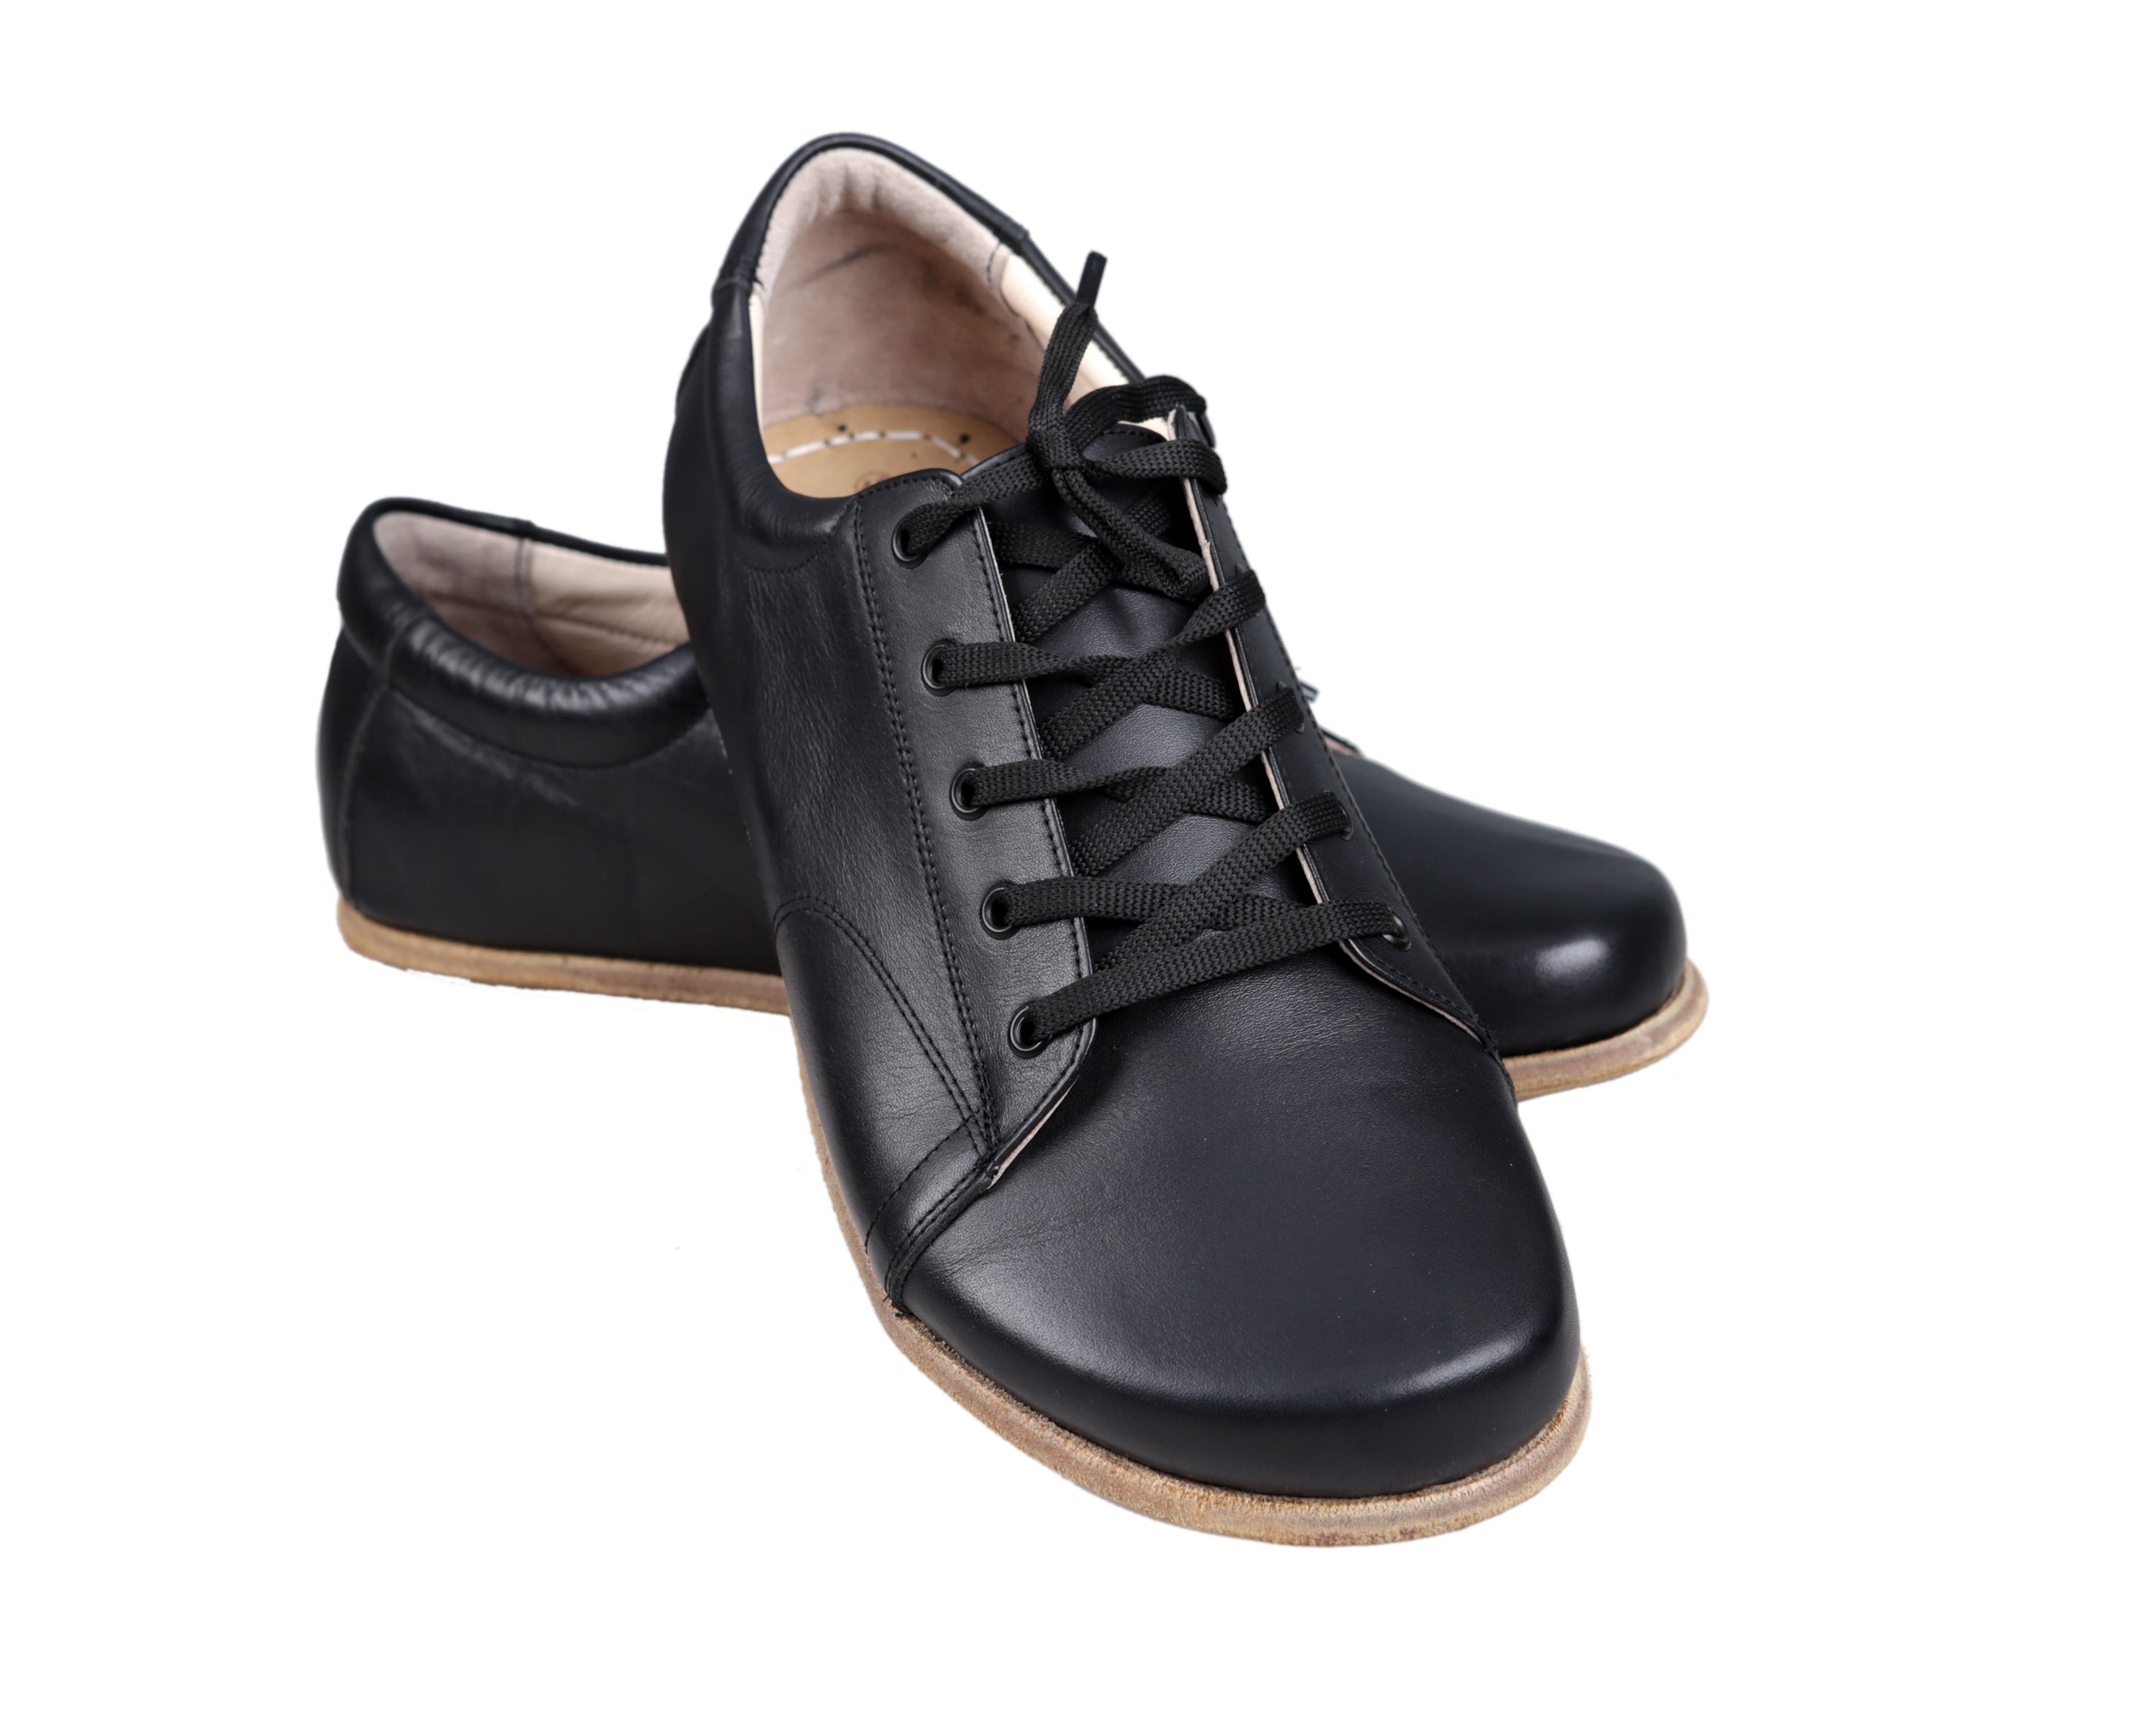 Black Sneaker Wide Barefoot Smooth Leather Handmade Shoes